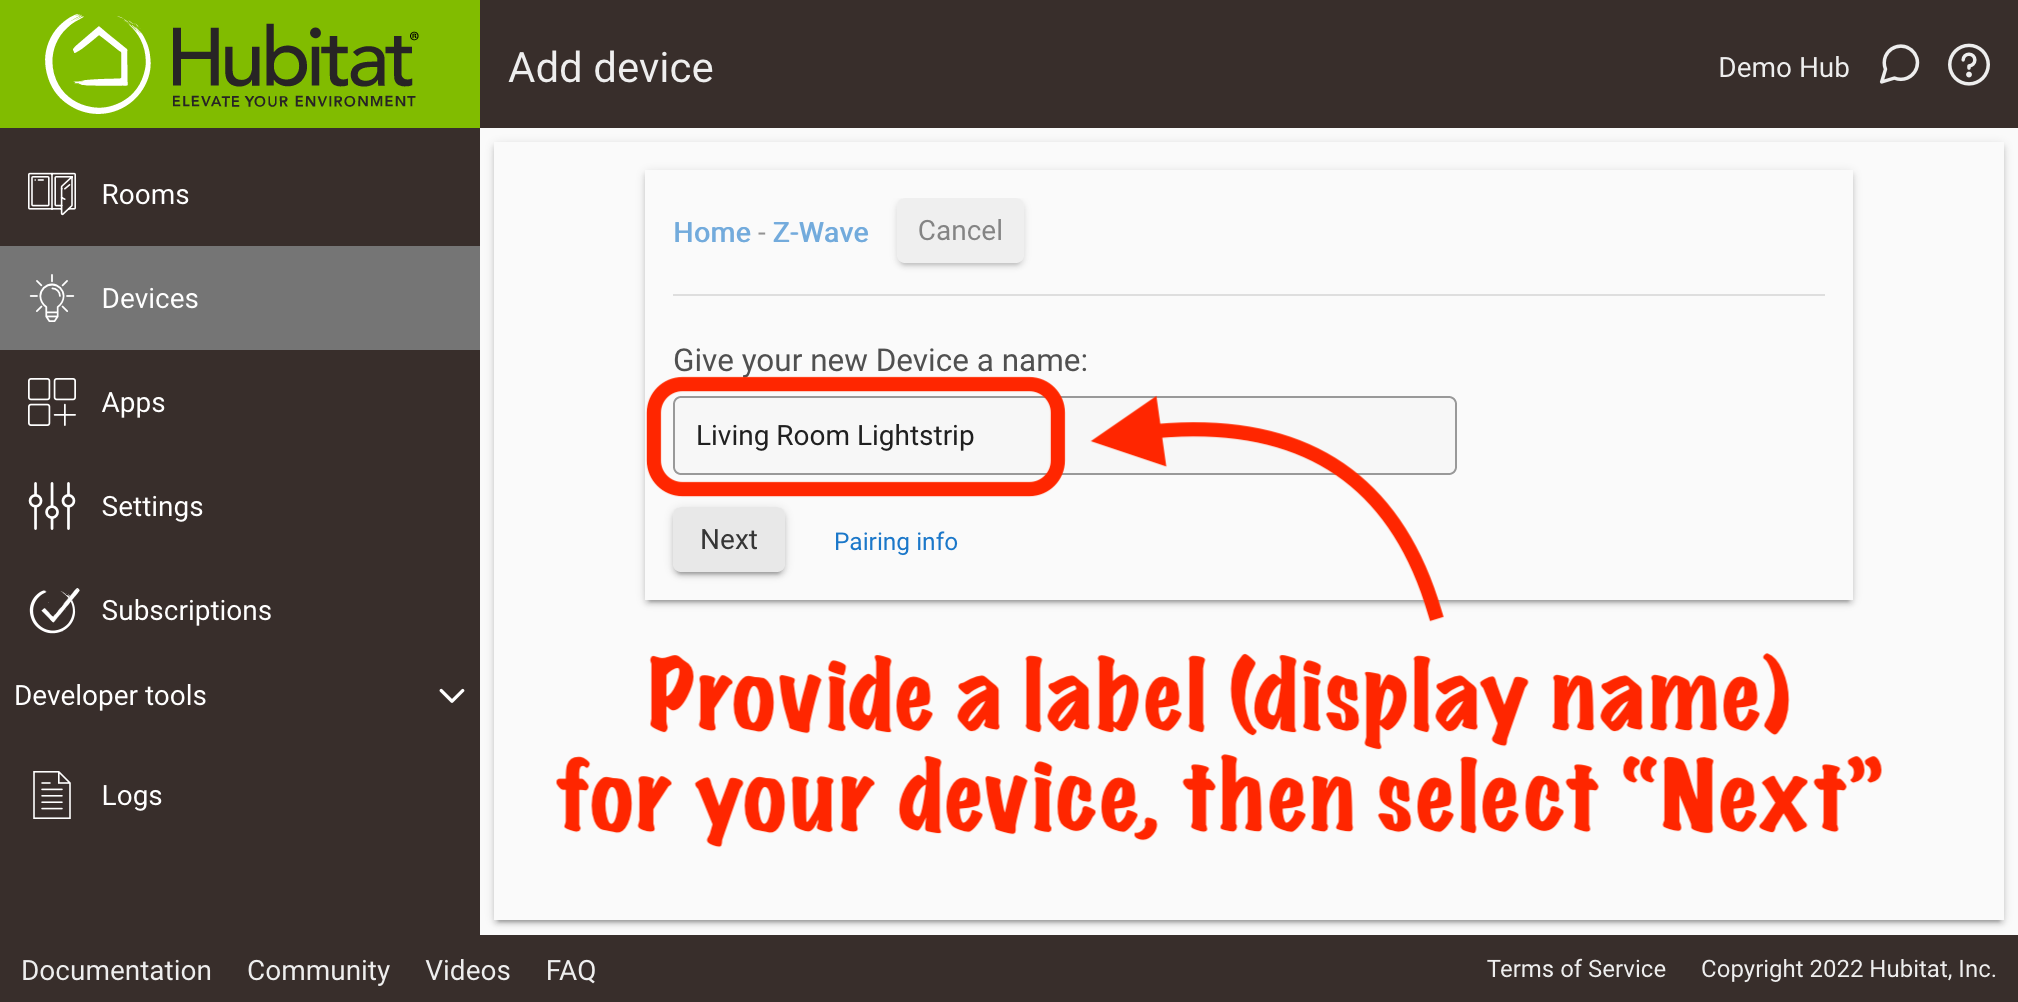 Immediately after joining a device to the hub, you can enter what you would like it to be called in a device label field. If you don't enter it here, you can always enter or change it from the device details page.